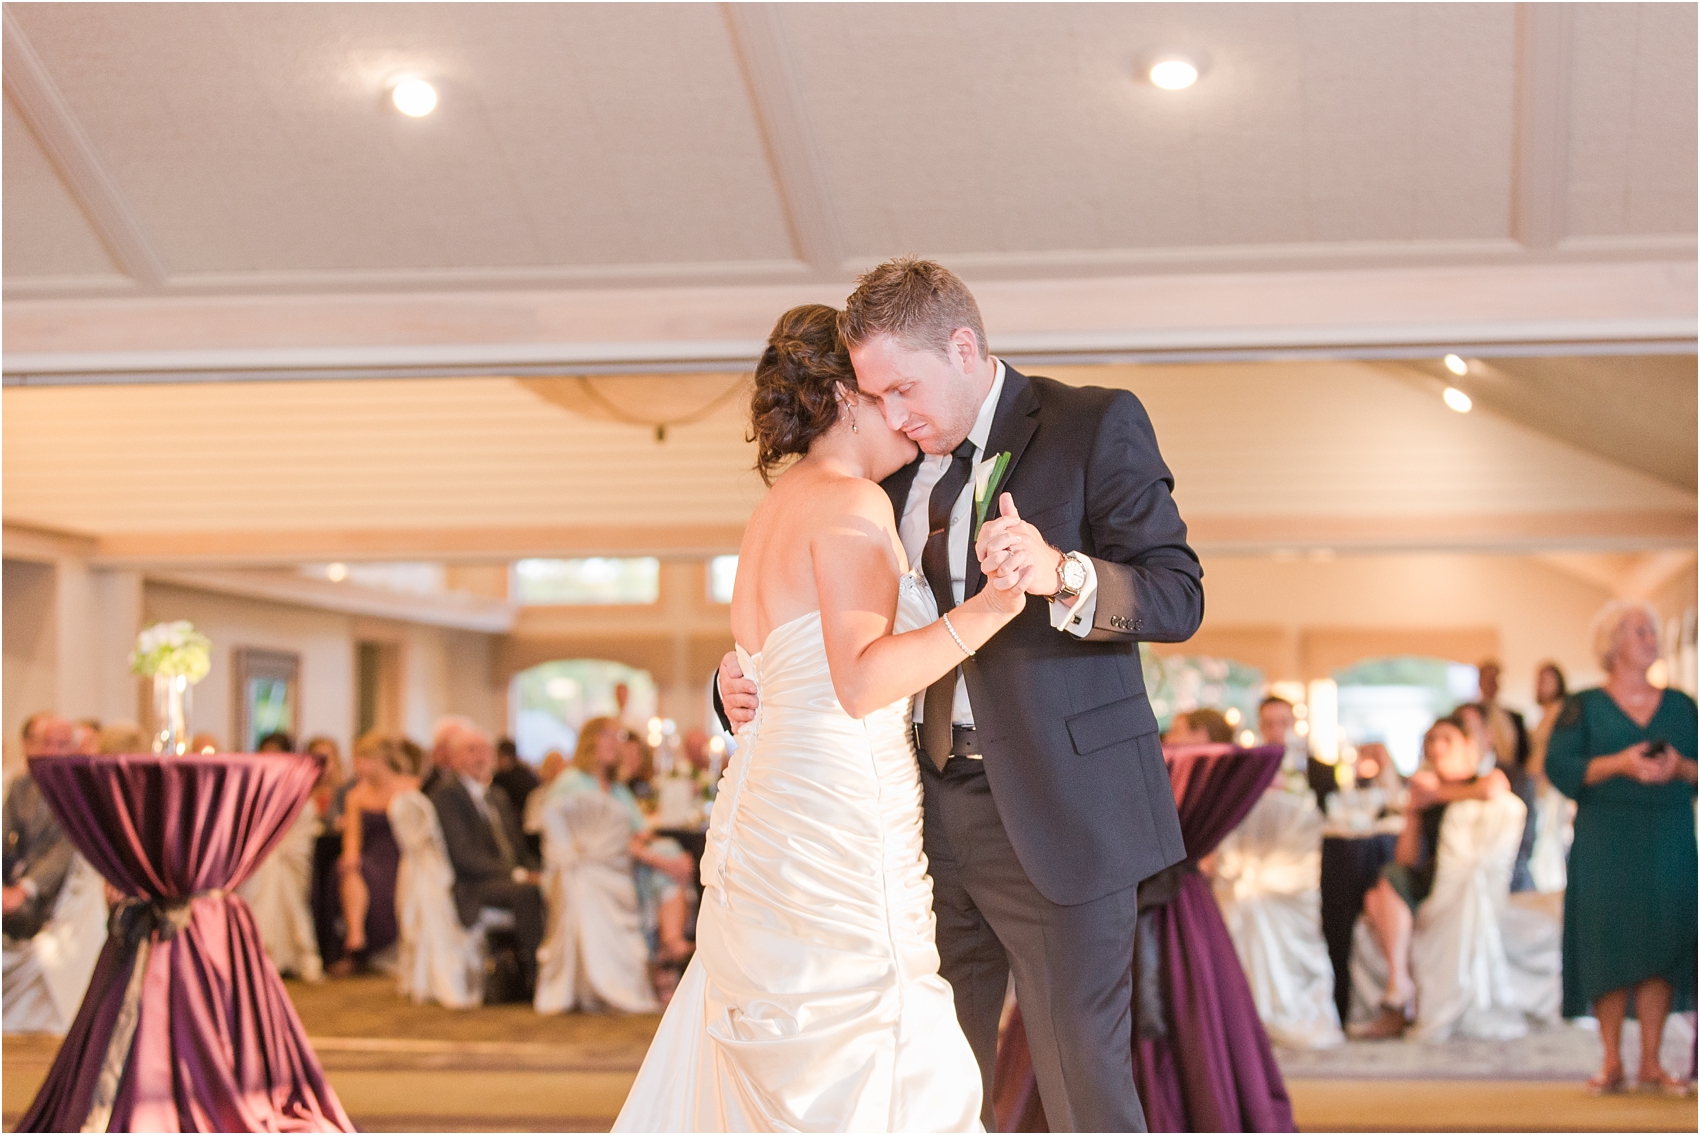 classic-wedding-photos-at-great-oaks-country-club-in-rochester-hills-mi-by-courtney-carolyn-photography_0103.jpg